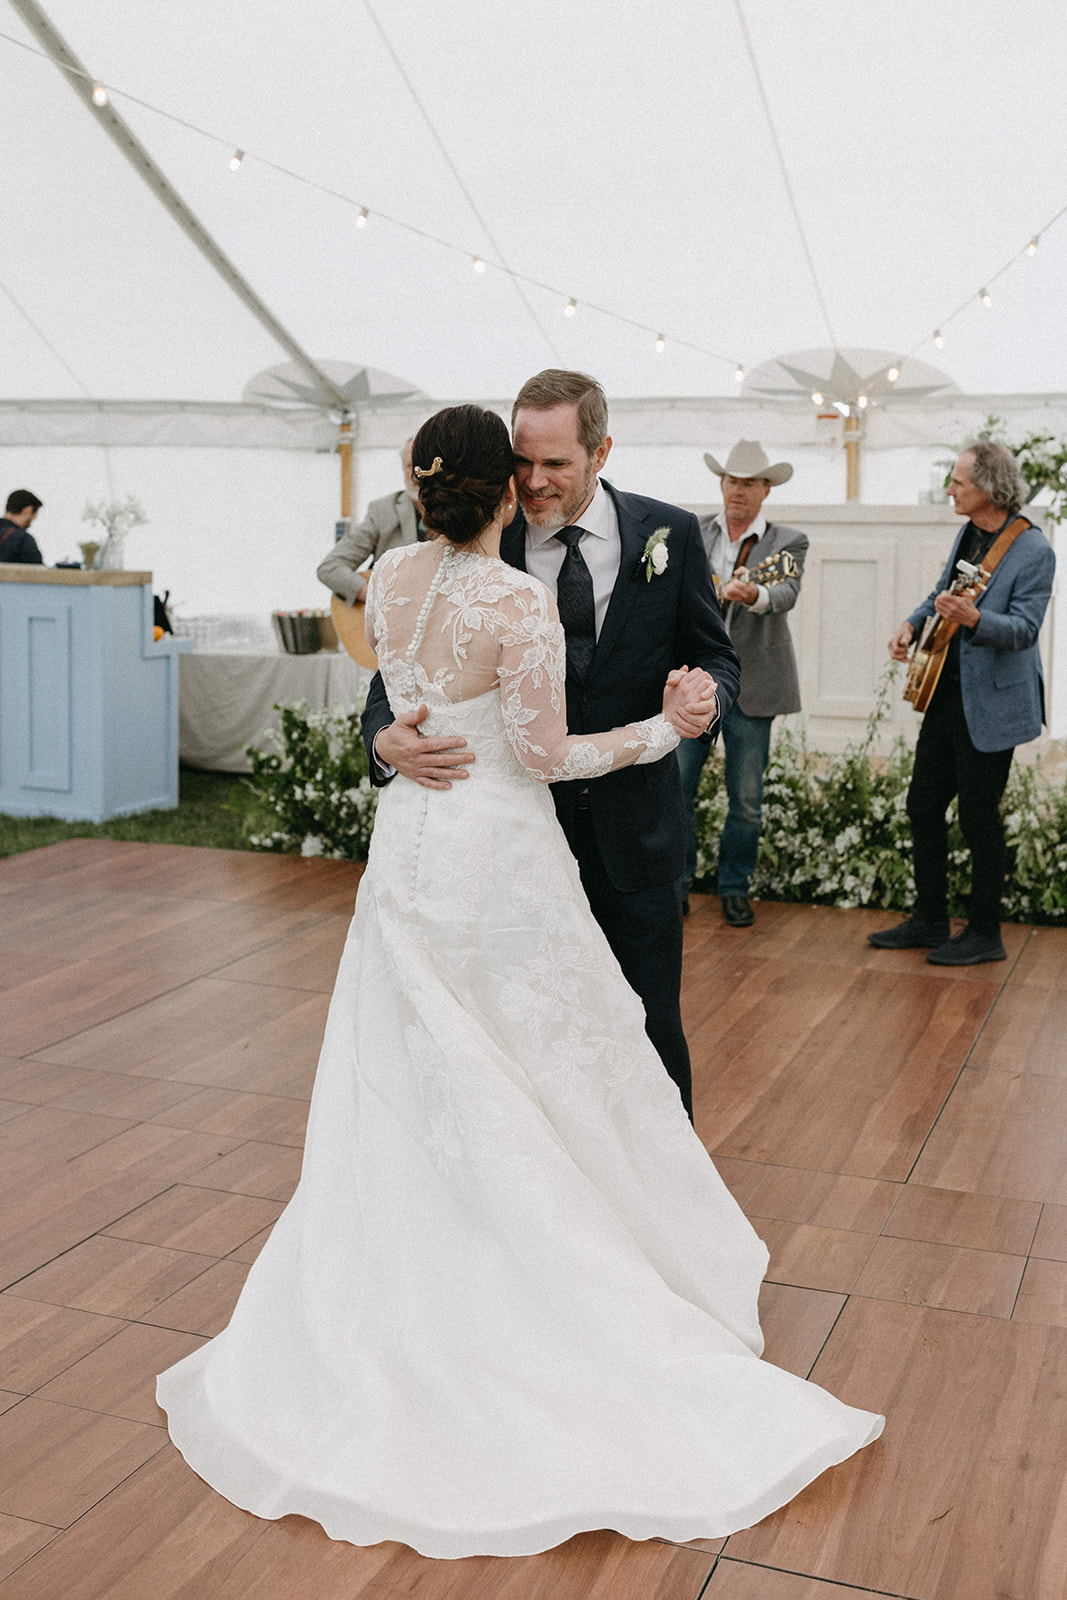 A couple shares their first dance while a live band plays in the background during their ranch wedding reception. 
